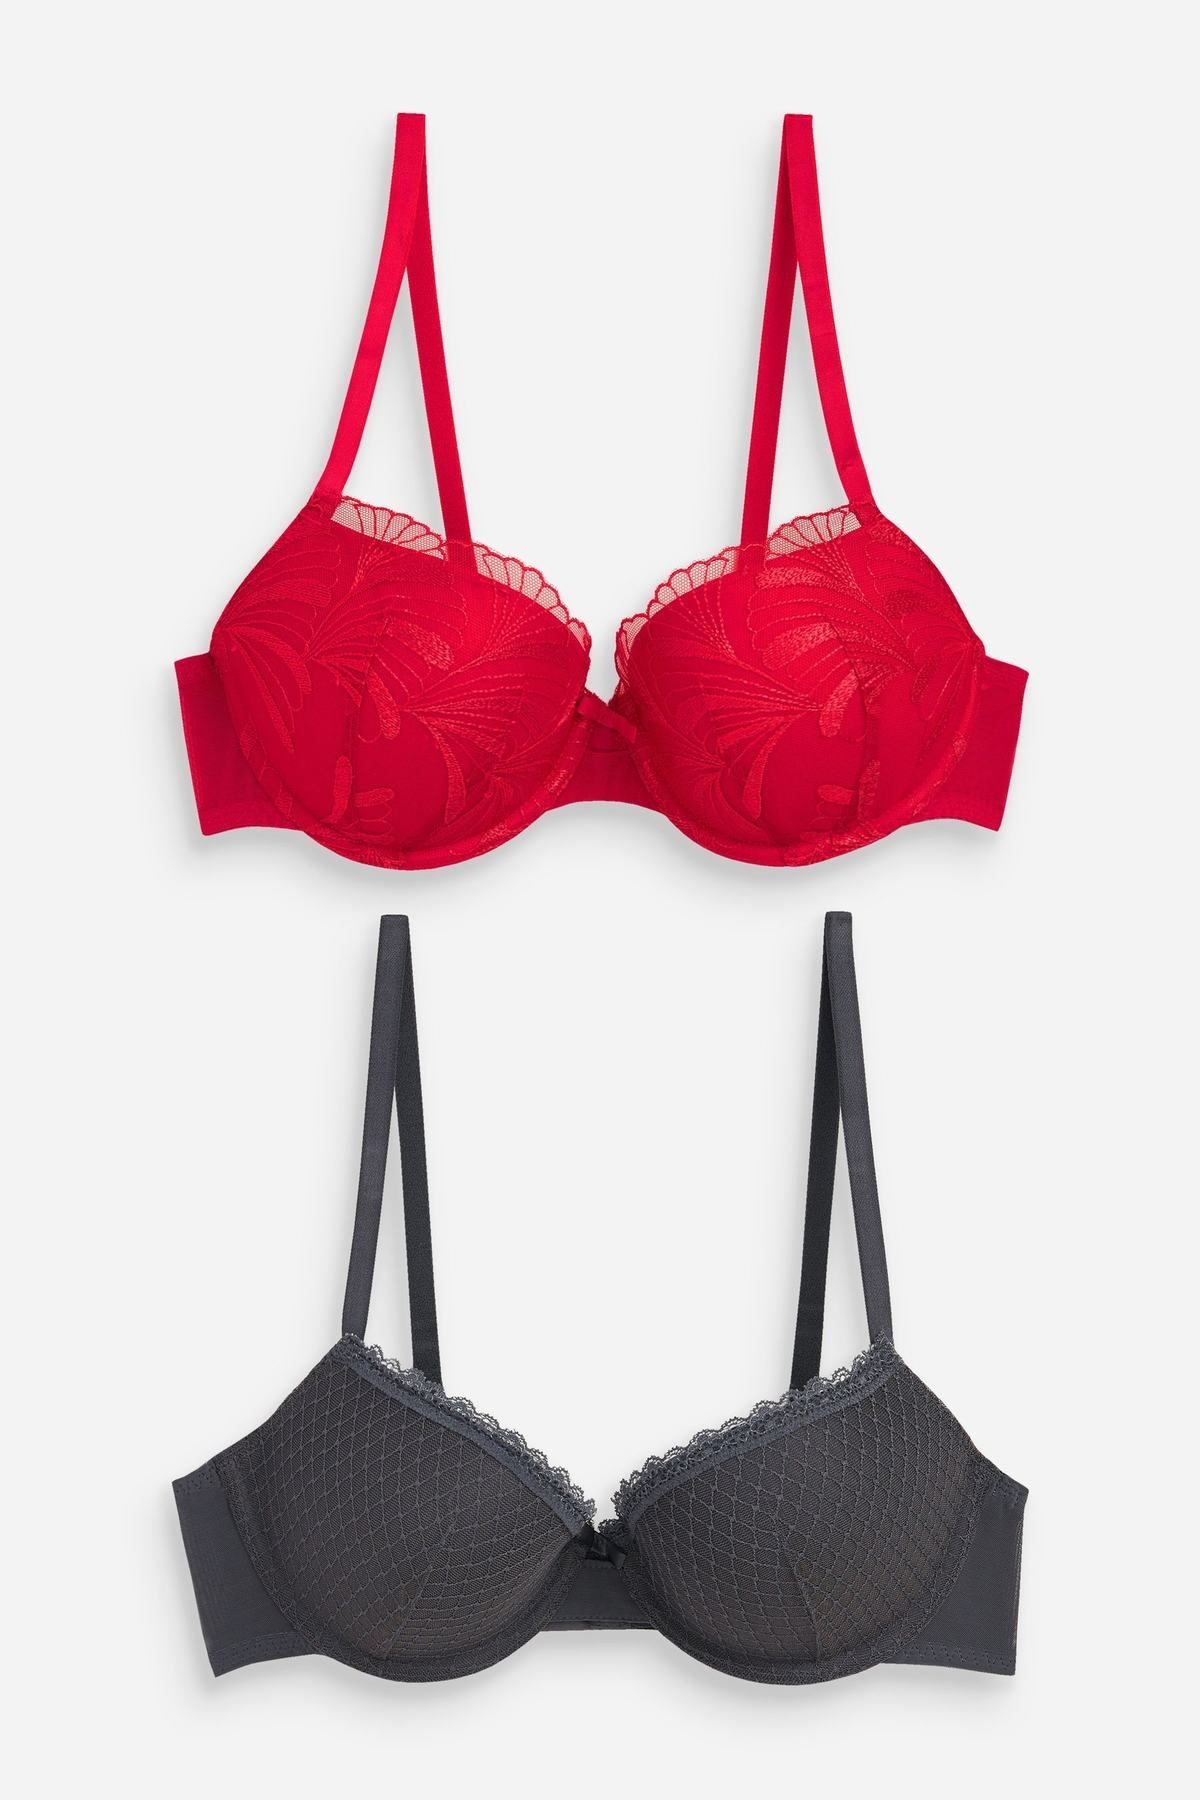 Buy Embroidered Bras 2 Pack from the Laura Ashley online shop